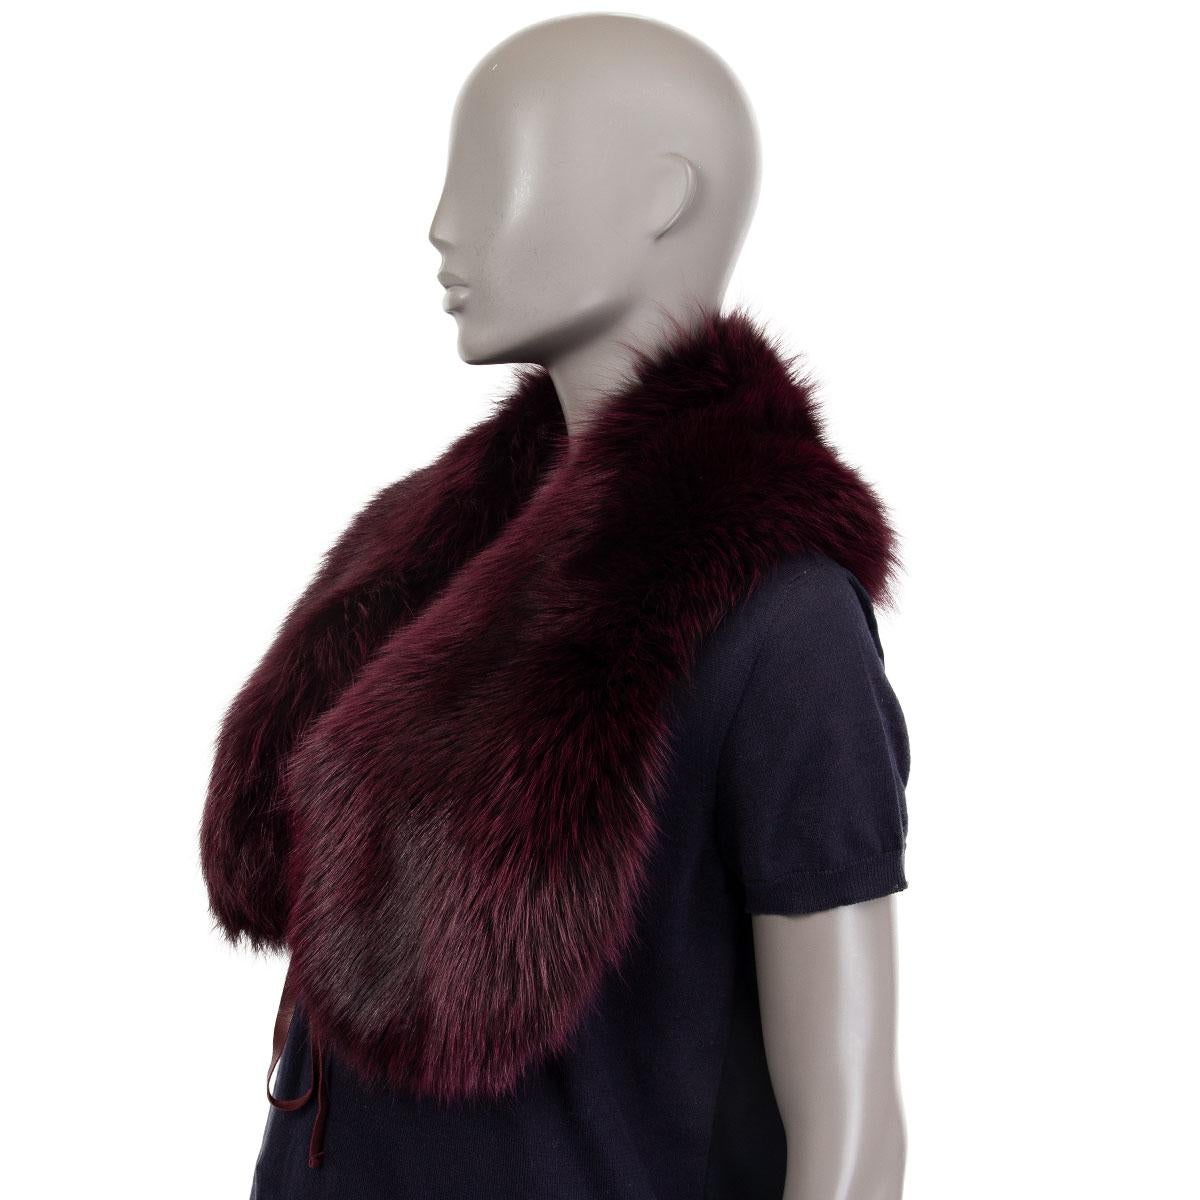 Prada shawl collar in deep burgundy dyed white fox fur with leather ribbons to close it on the front. Has been worn and is in excellent condition. 

Width 21cm (8.2in)
Length 100cm (39in)